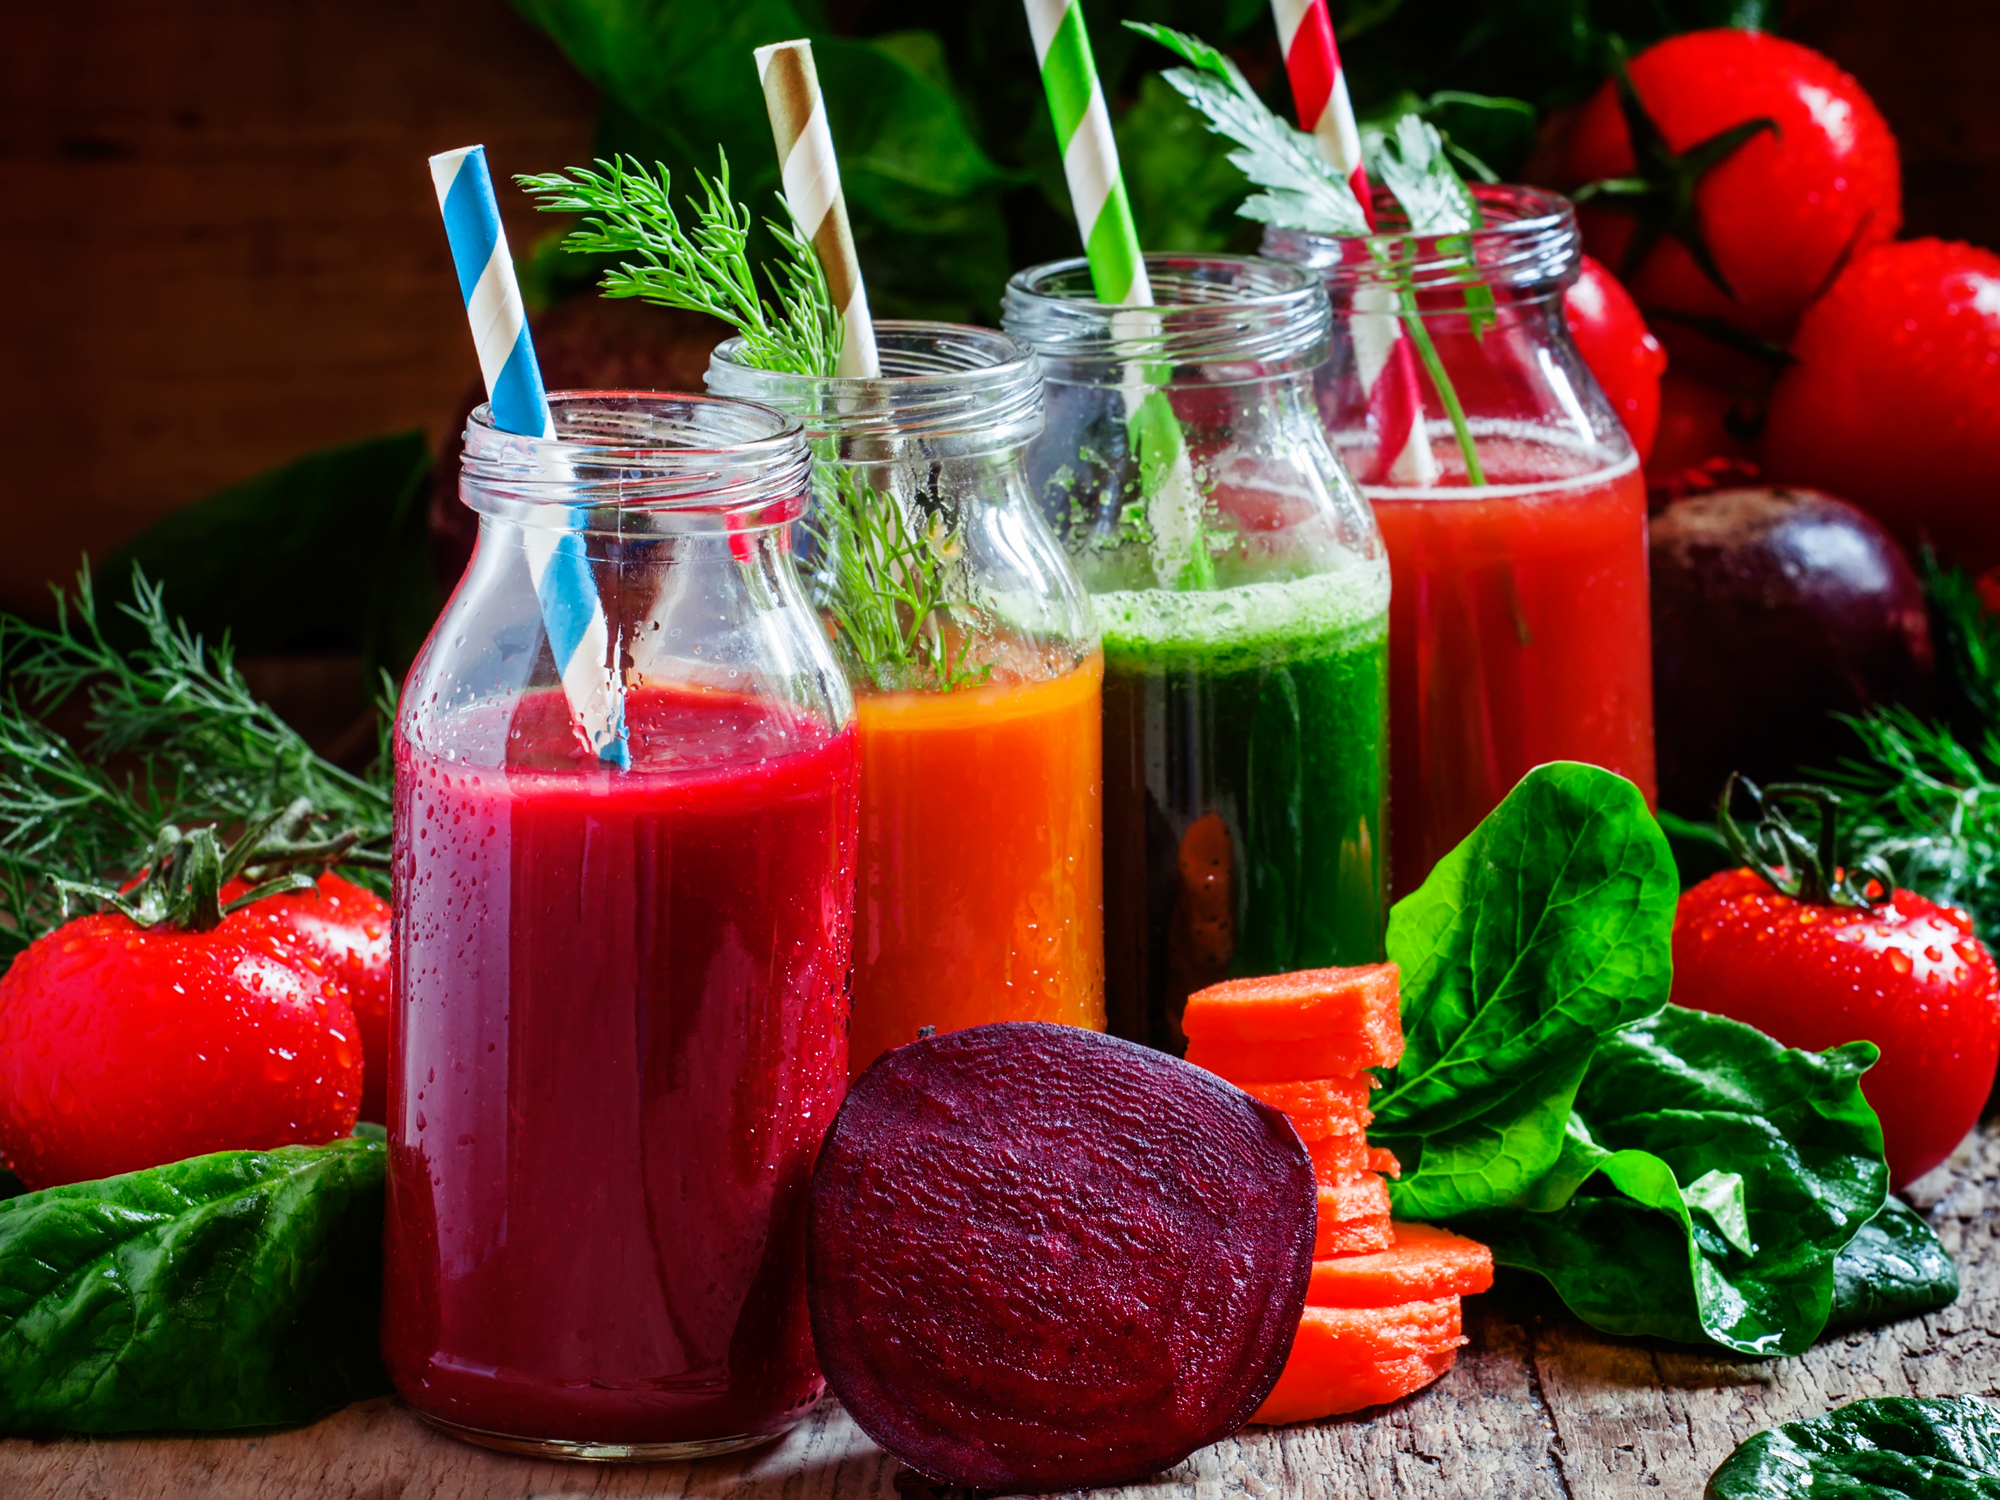 Pull stamina out of thin air with beet juice